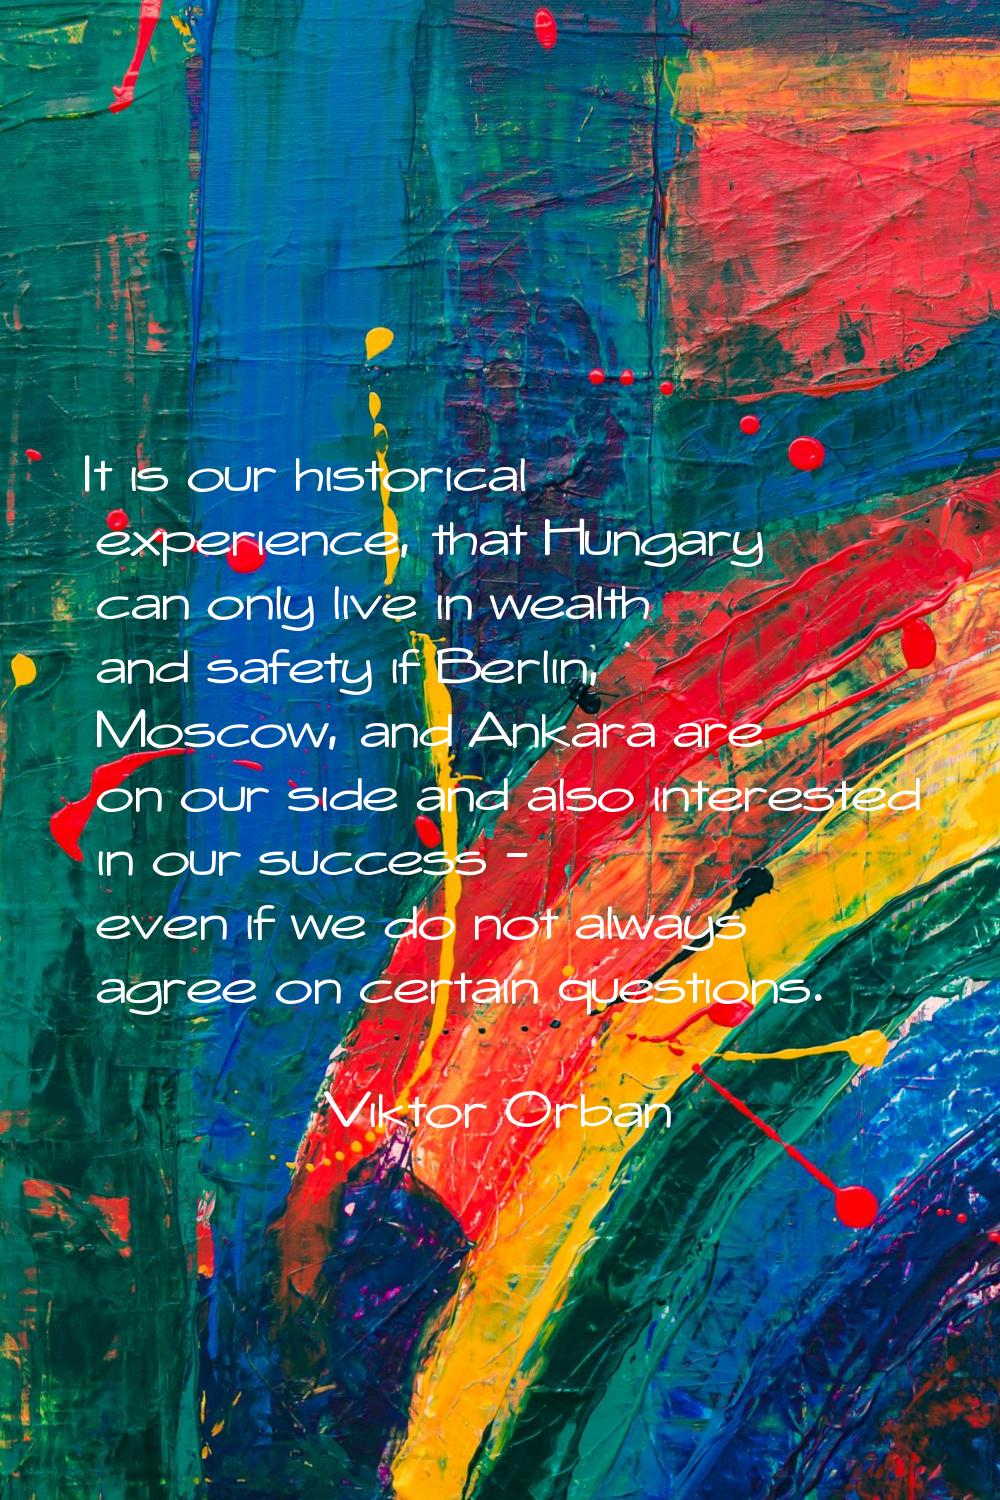 It is our historical experience, that Hungary can only live in wealth and safety if Berlin, Moscow,